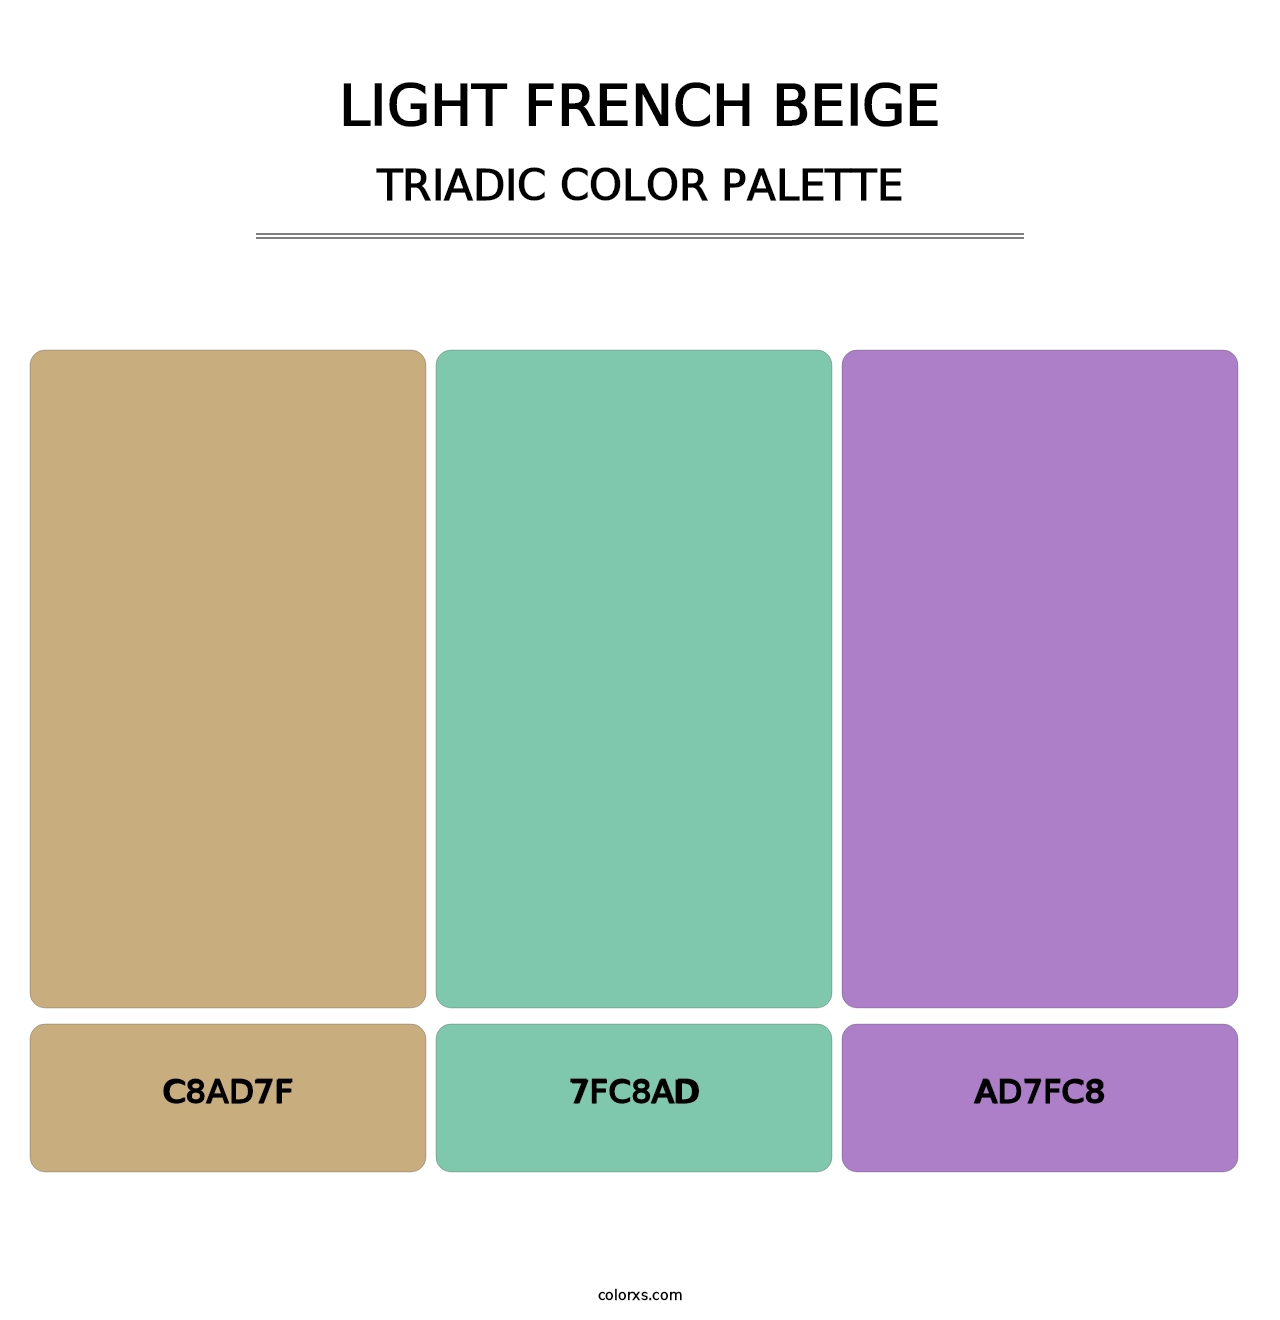 Light French Beige - Triadic Color Palette